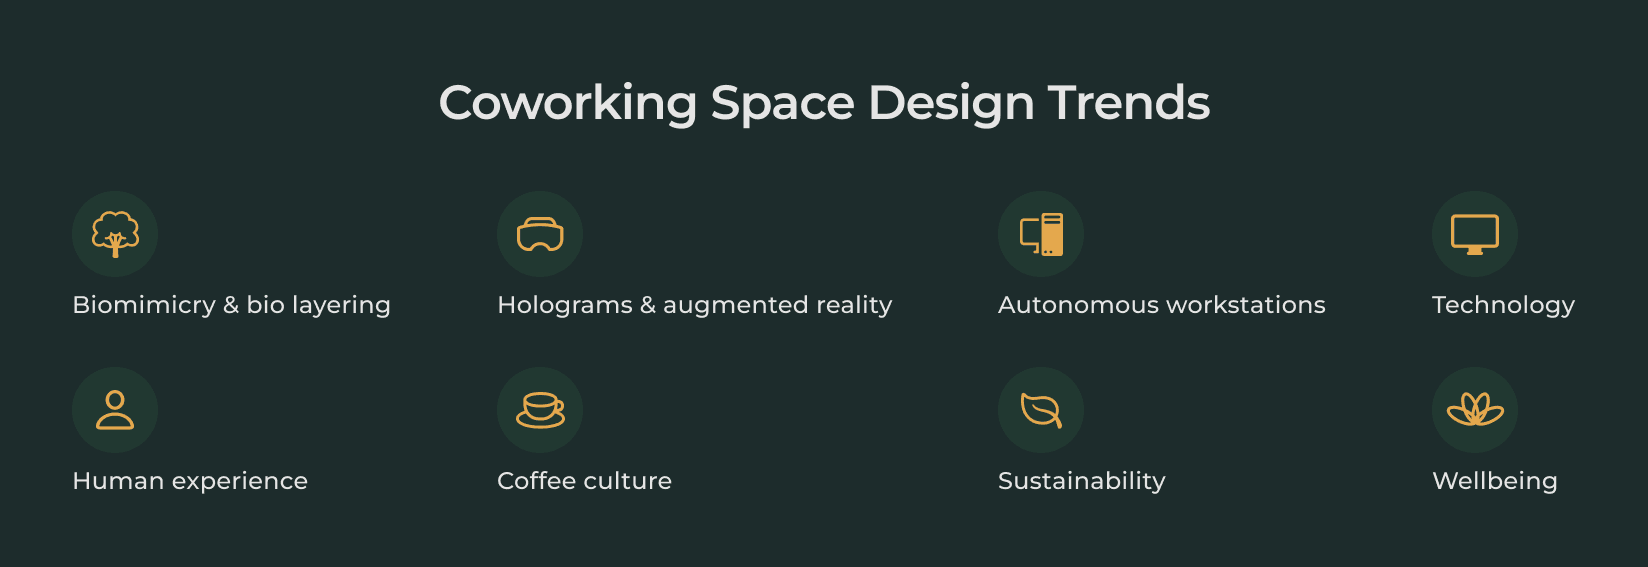 Coworking space design trends